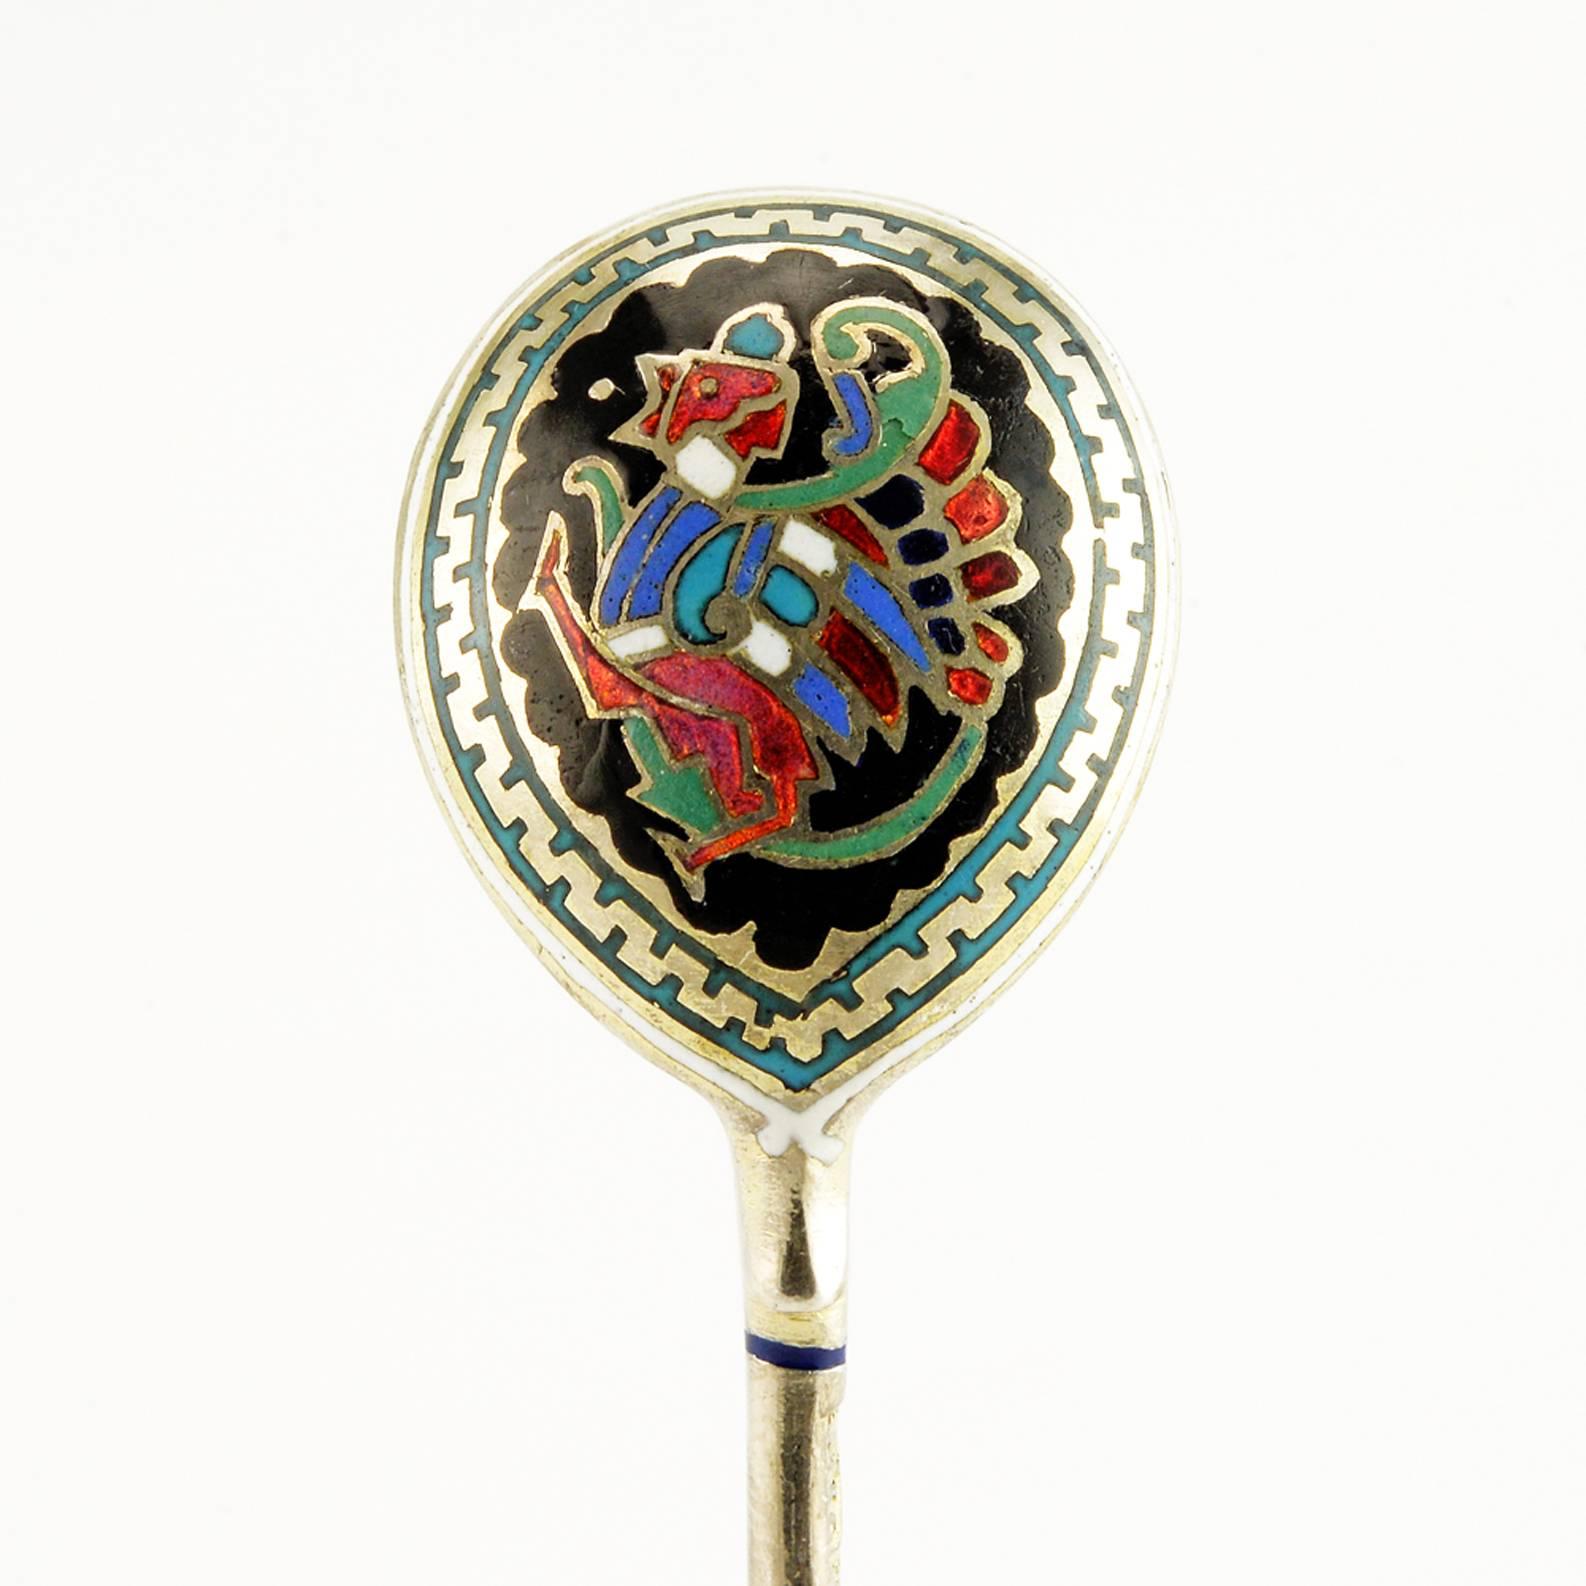 A rare set of twelve Russian silver and champlevé enamel demitasse spoons by Imperial court jeweler Sazikov in their original case, Moscow, 1878. In the Russian Revival style, the backs of the bowls enameled with a brightly colored and stylized